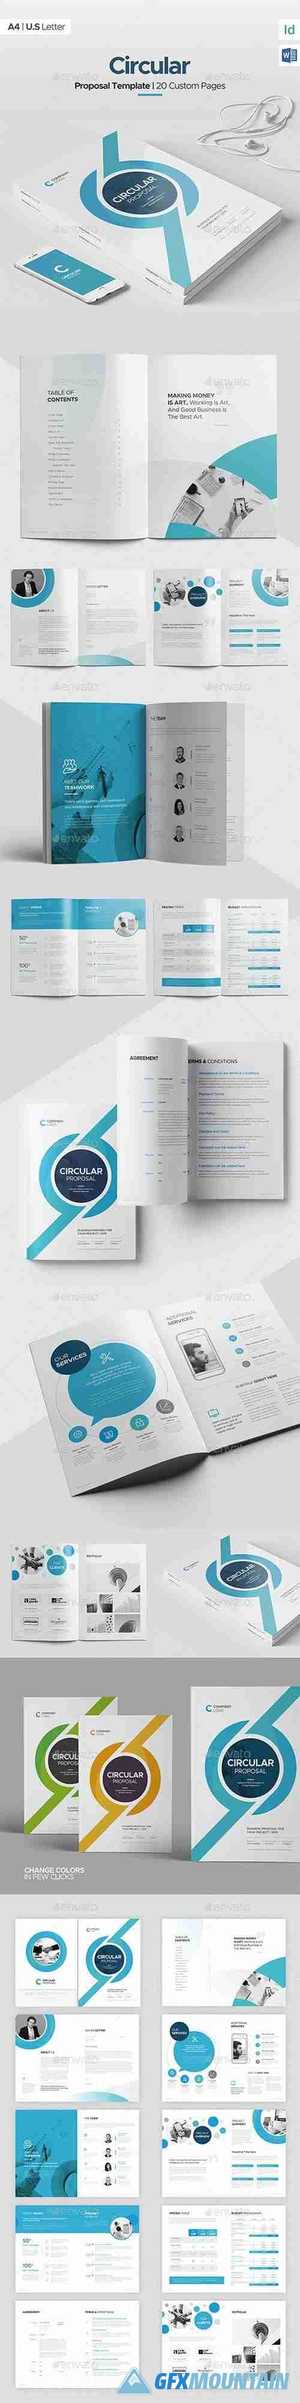 Corporate Brand Guidelines - Brand Manuals 27768180